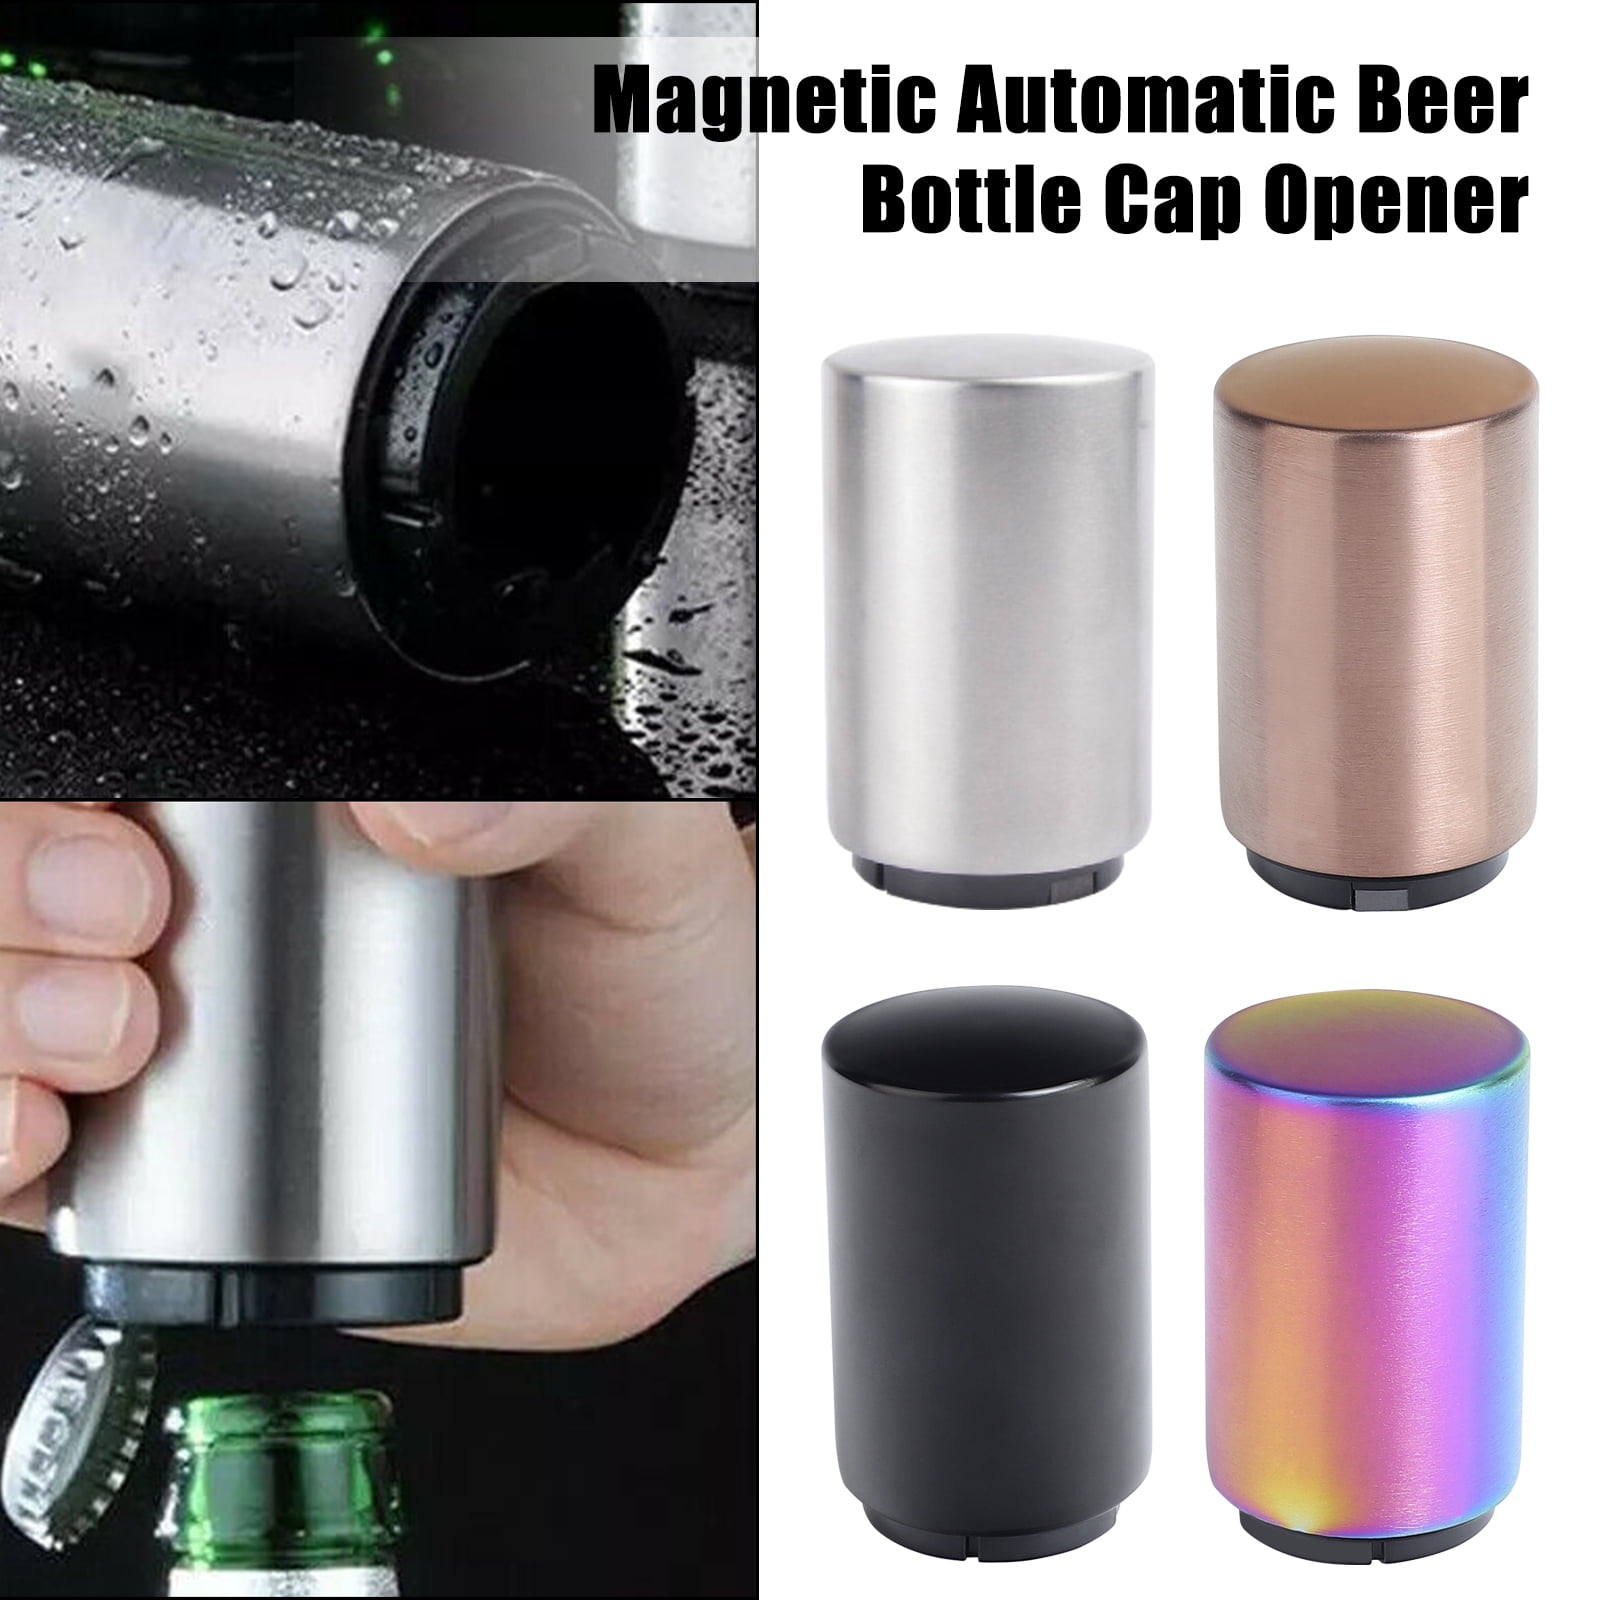 Gold Magnetic Beer Bottle Opener with Cap Catcher Stainless Steel Magnet Push 